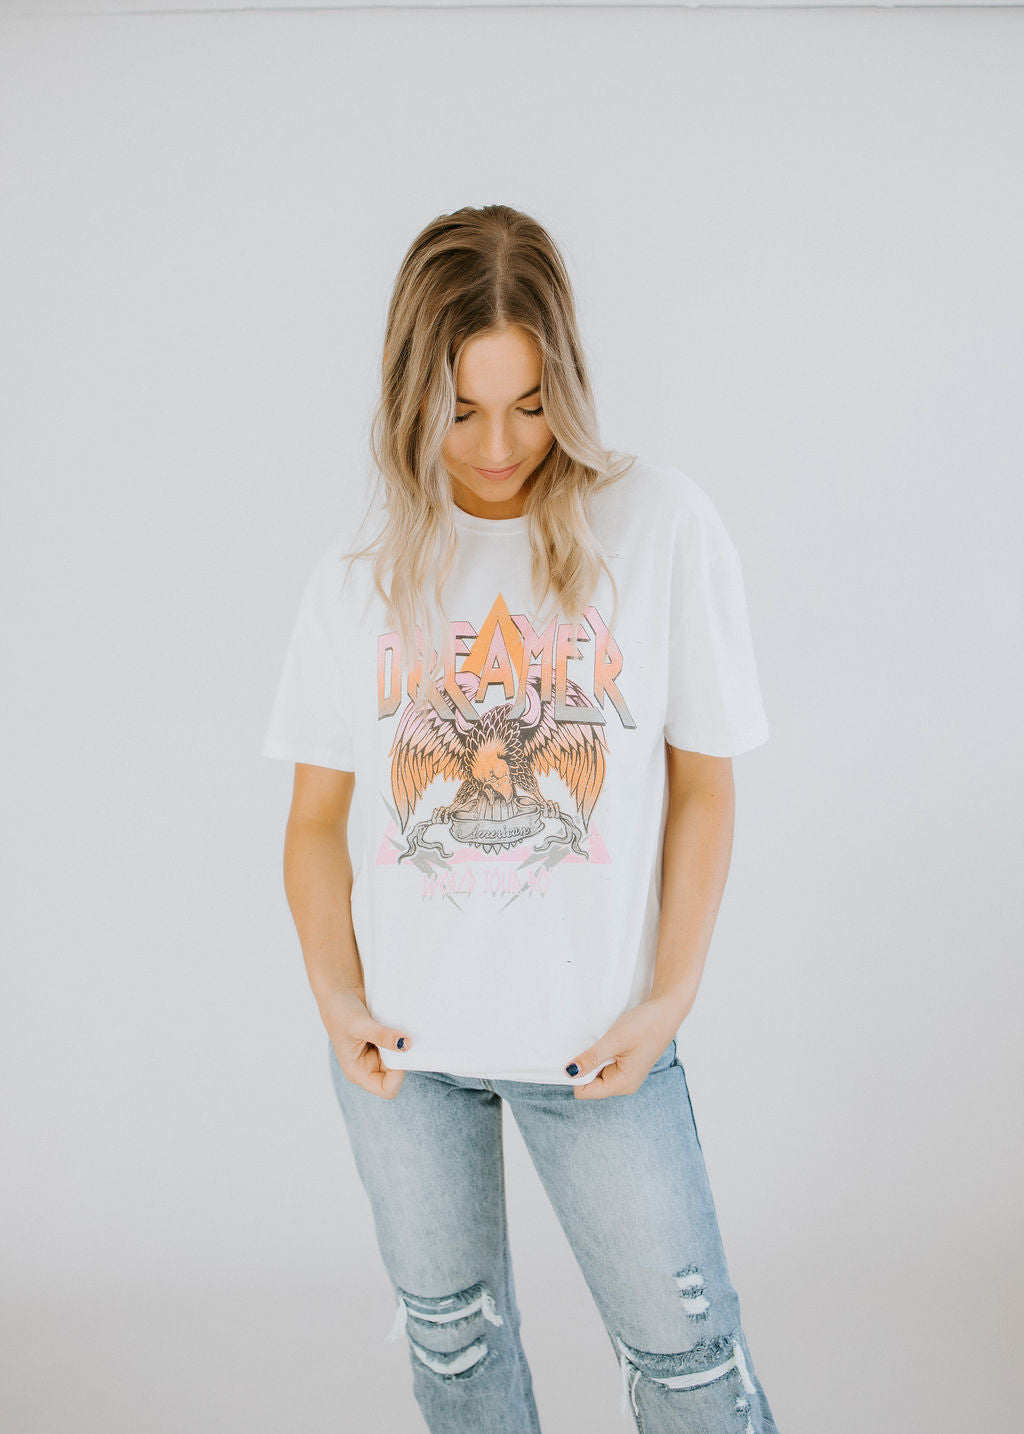 Dreamer Oversized Graphic Tee FINAL SALE